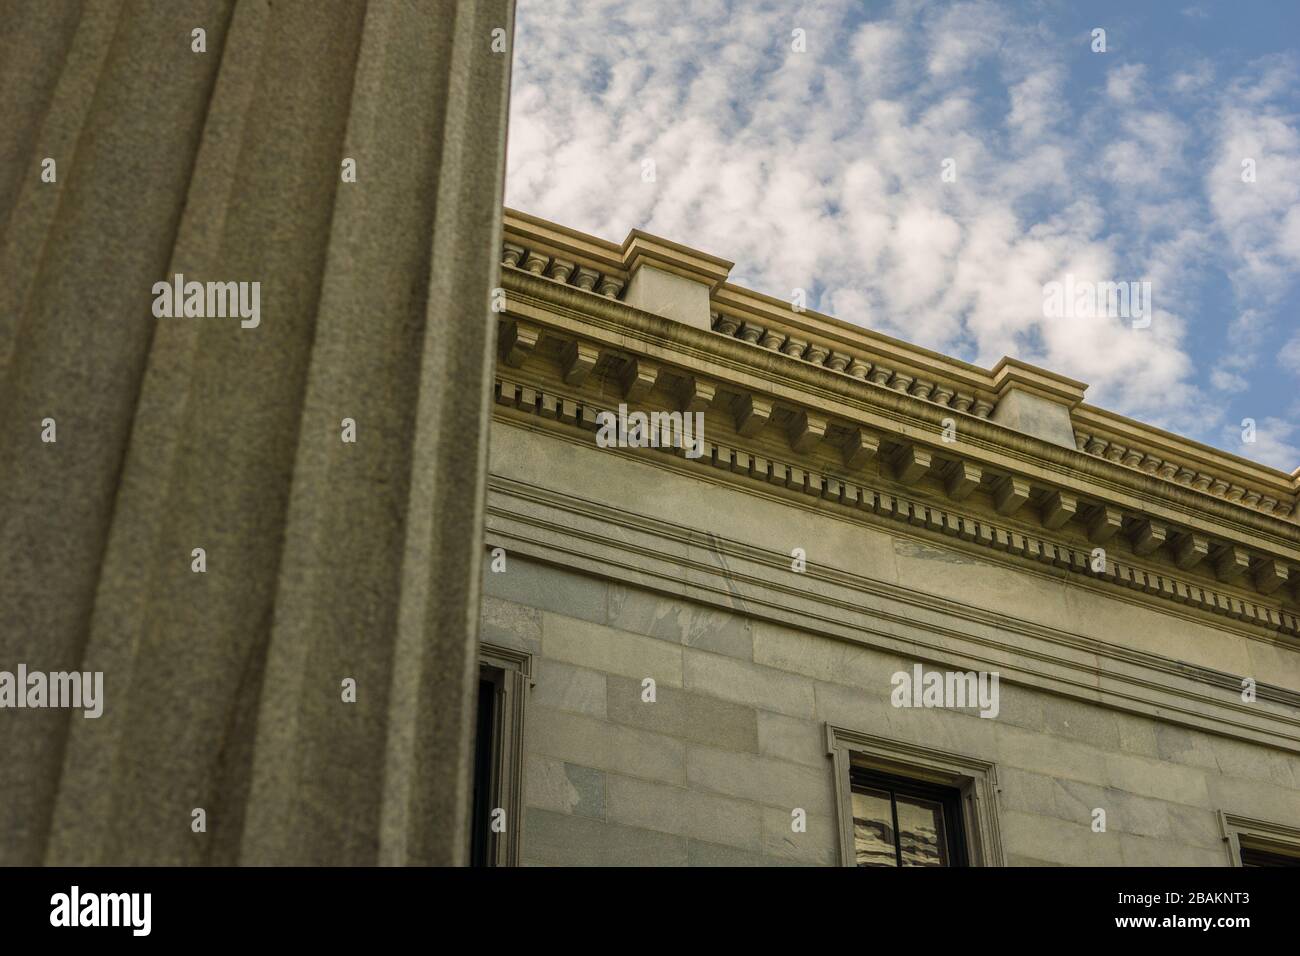 Greek Revival Architecture style used for many government buildings Stock Photo